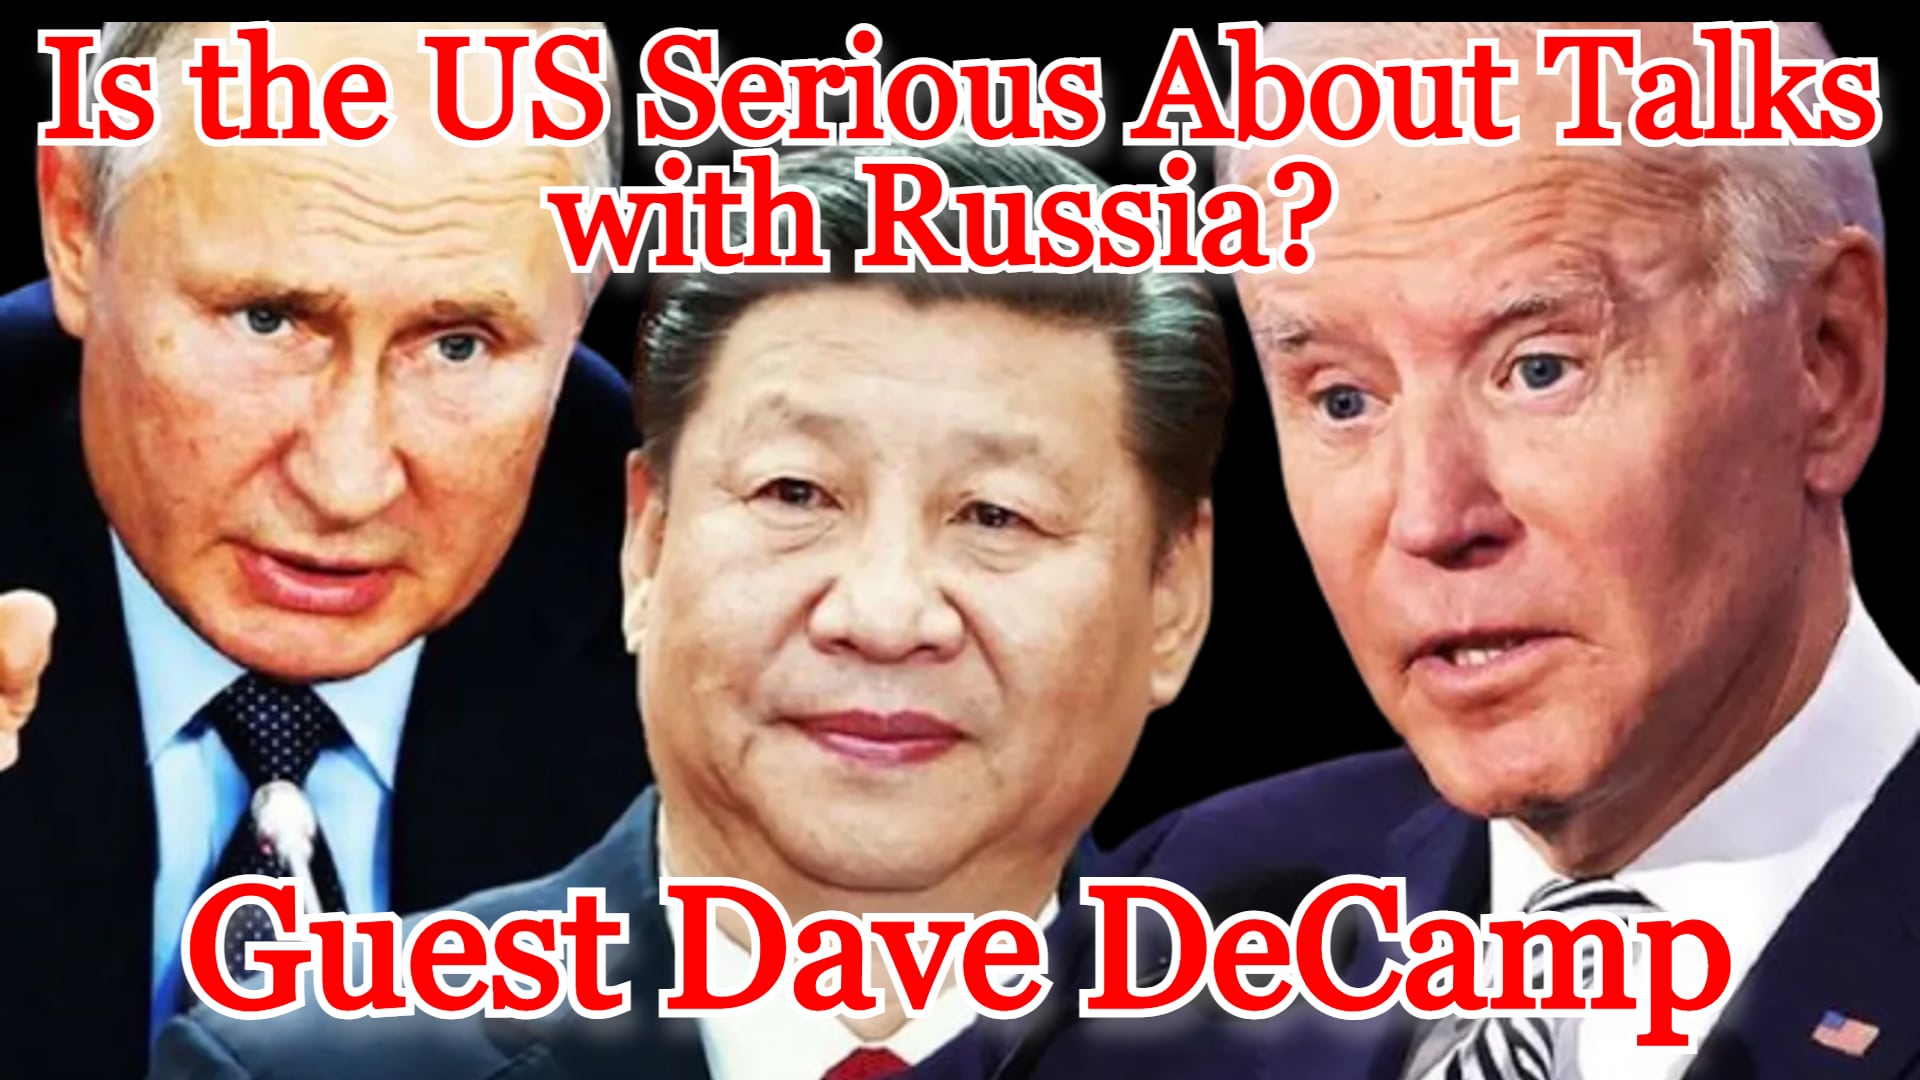 COI #351: Is the US Serious About Talks with Russia? Guest Dave DeCamp